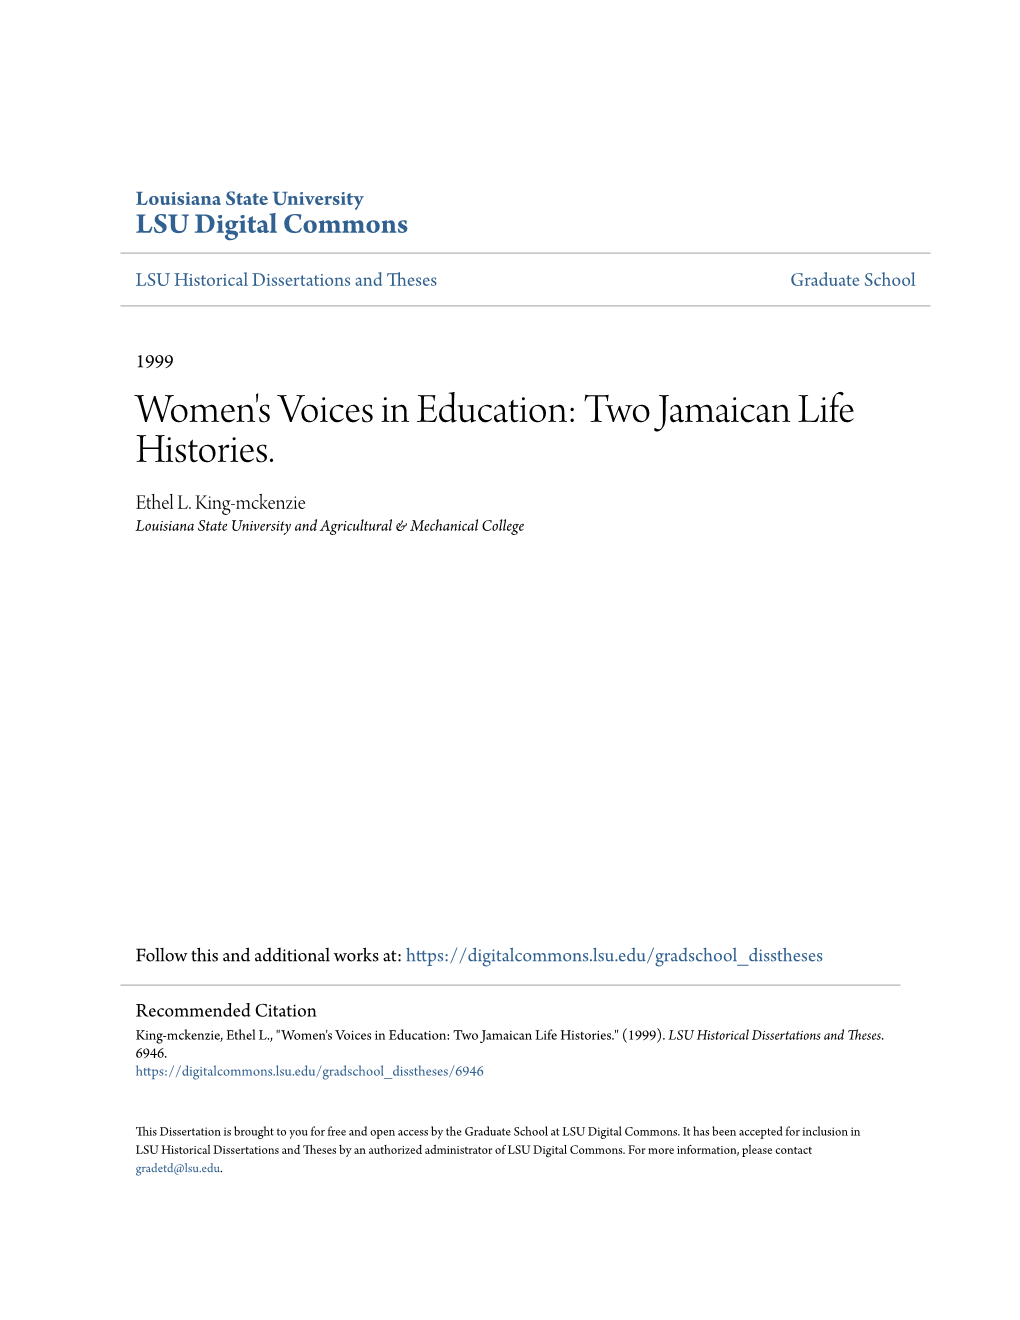 Women's Voices in Education: Two Jamaican Life Histories. Ethel L